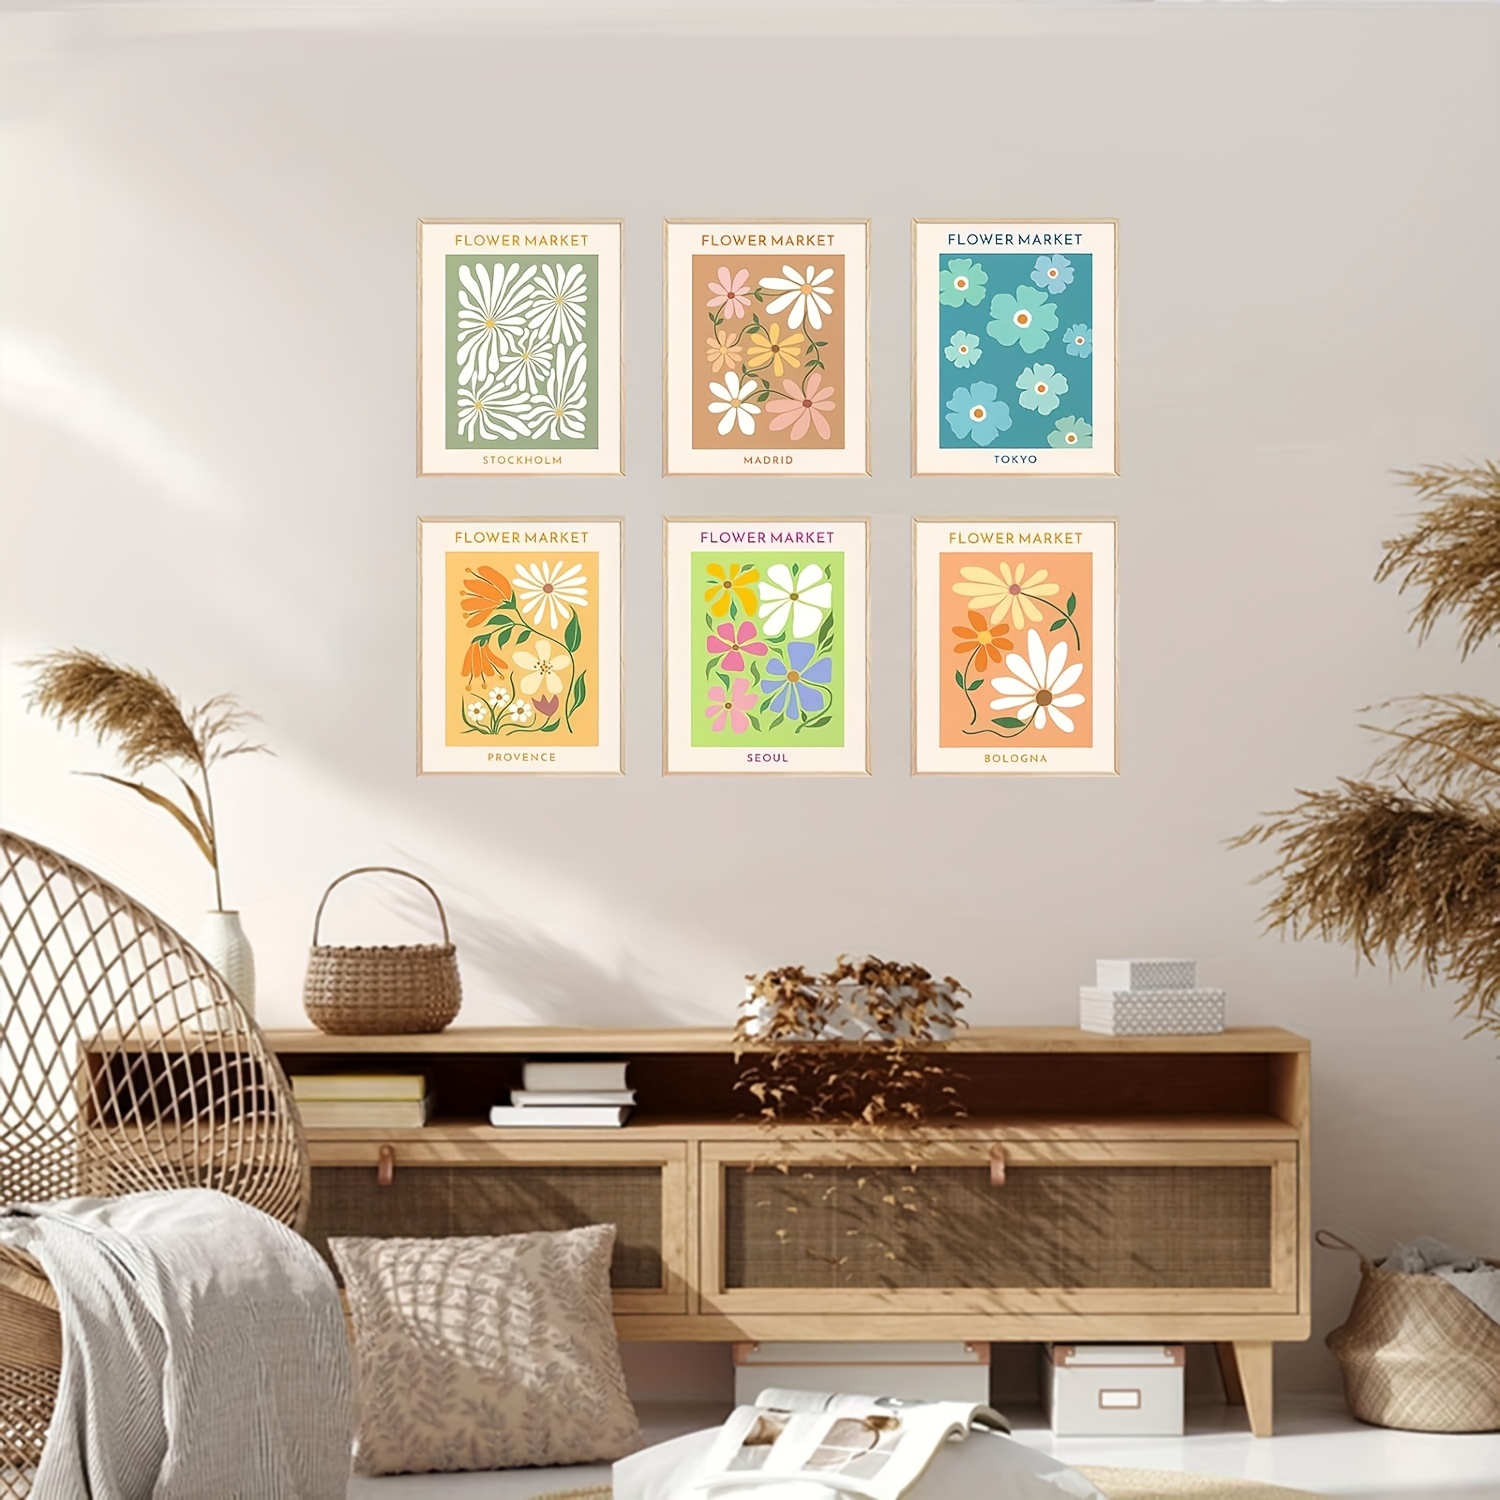 Floral art by Matisse Poster